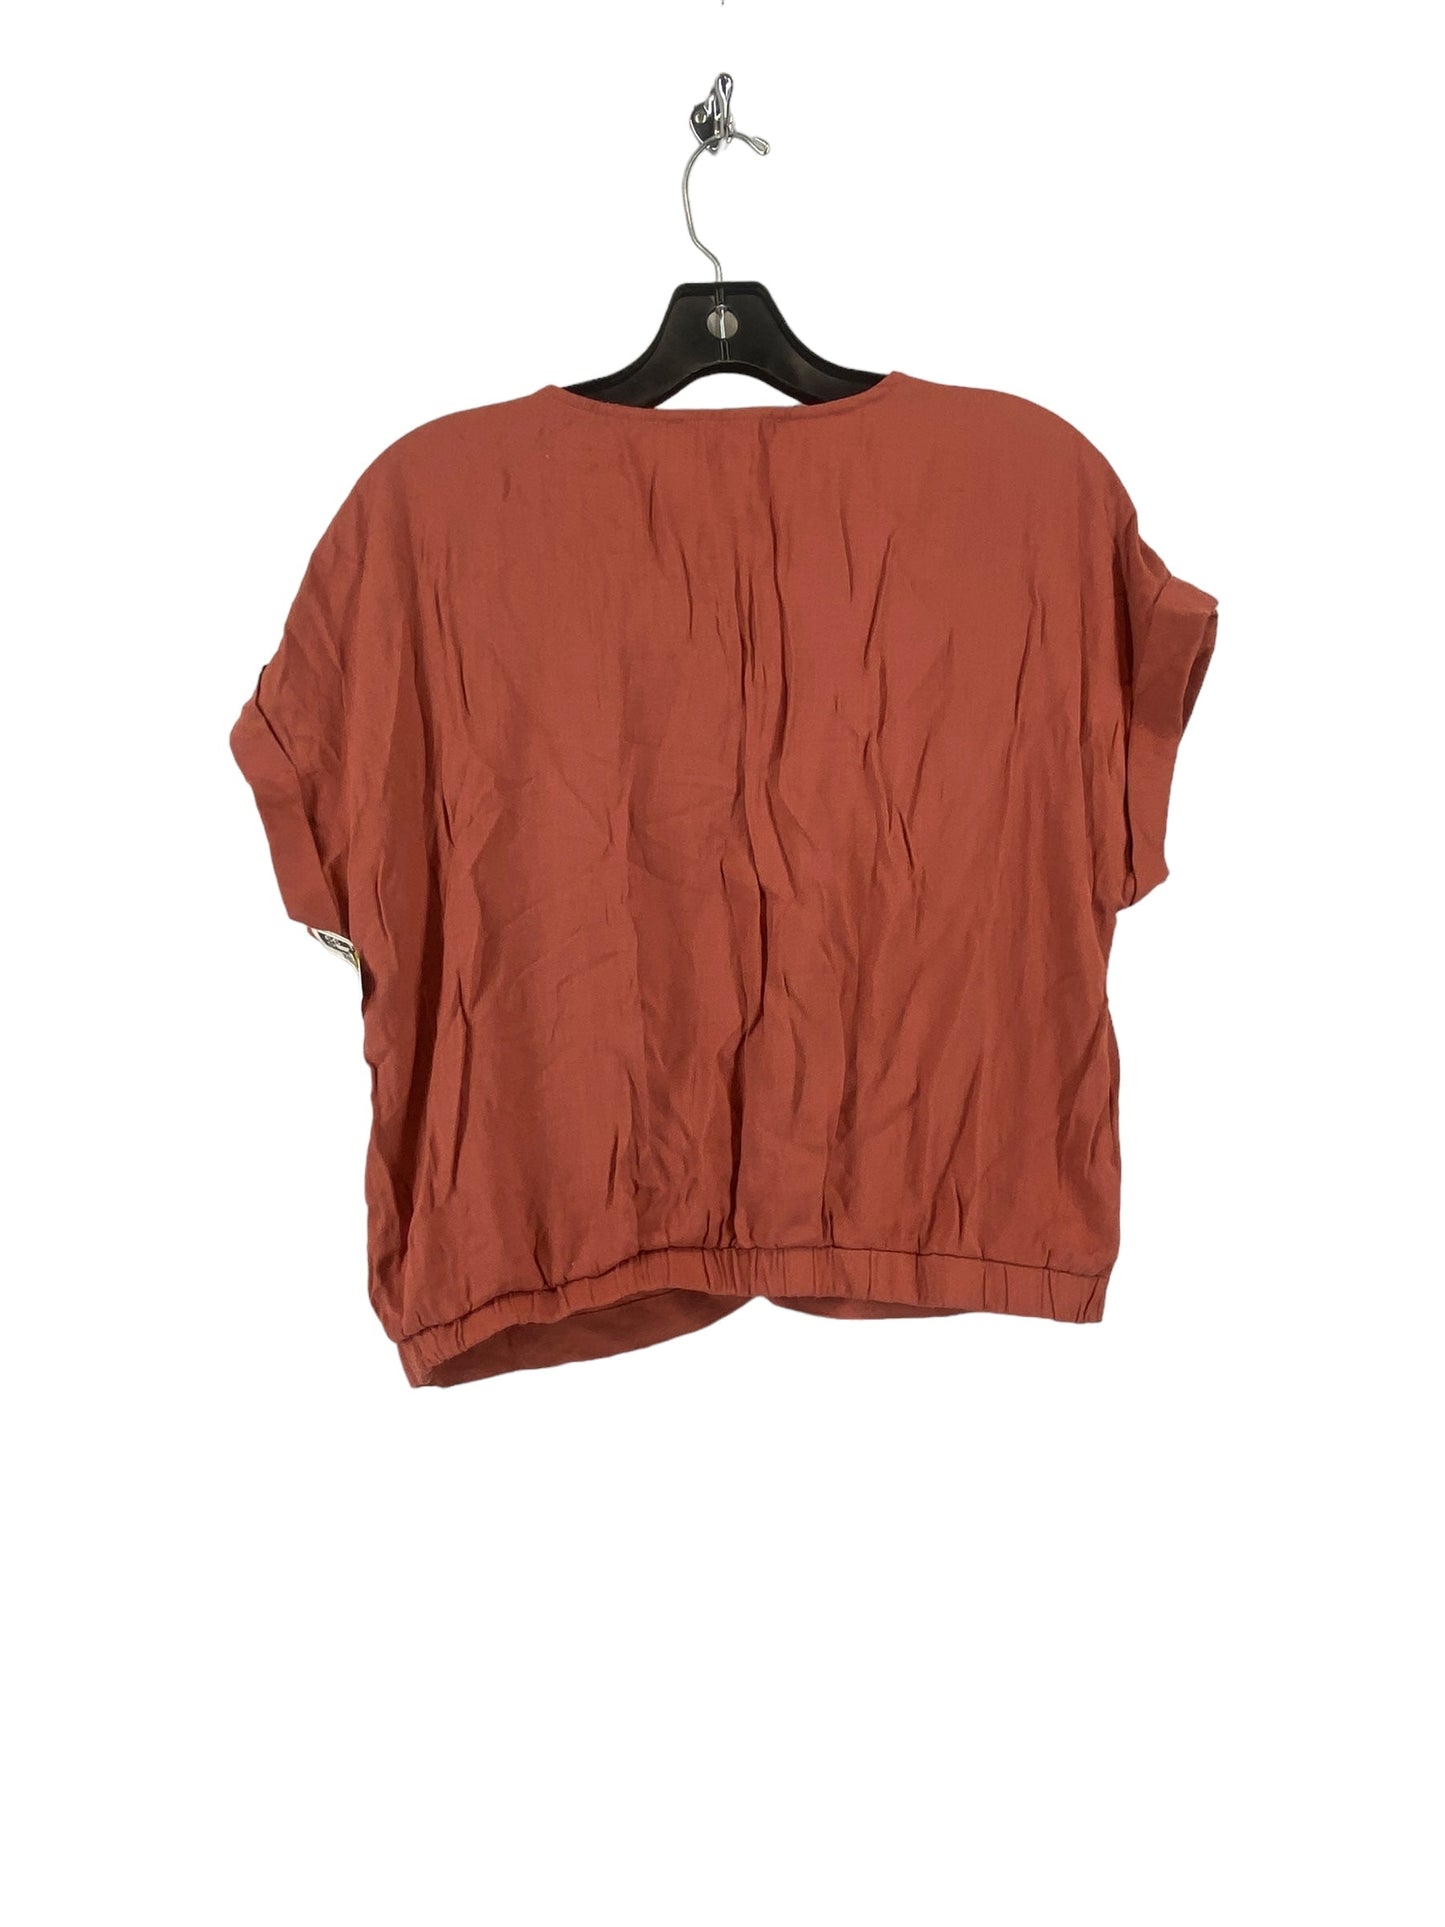 Red Top Short Sleeve Sweet Wanderer, Size L